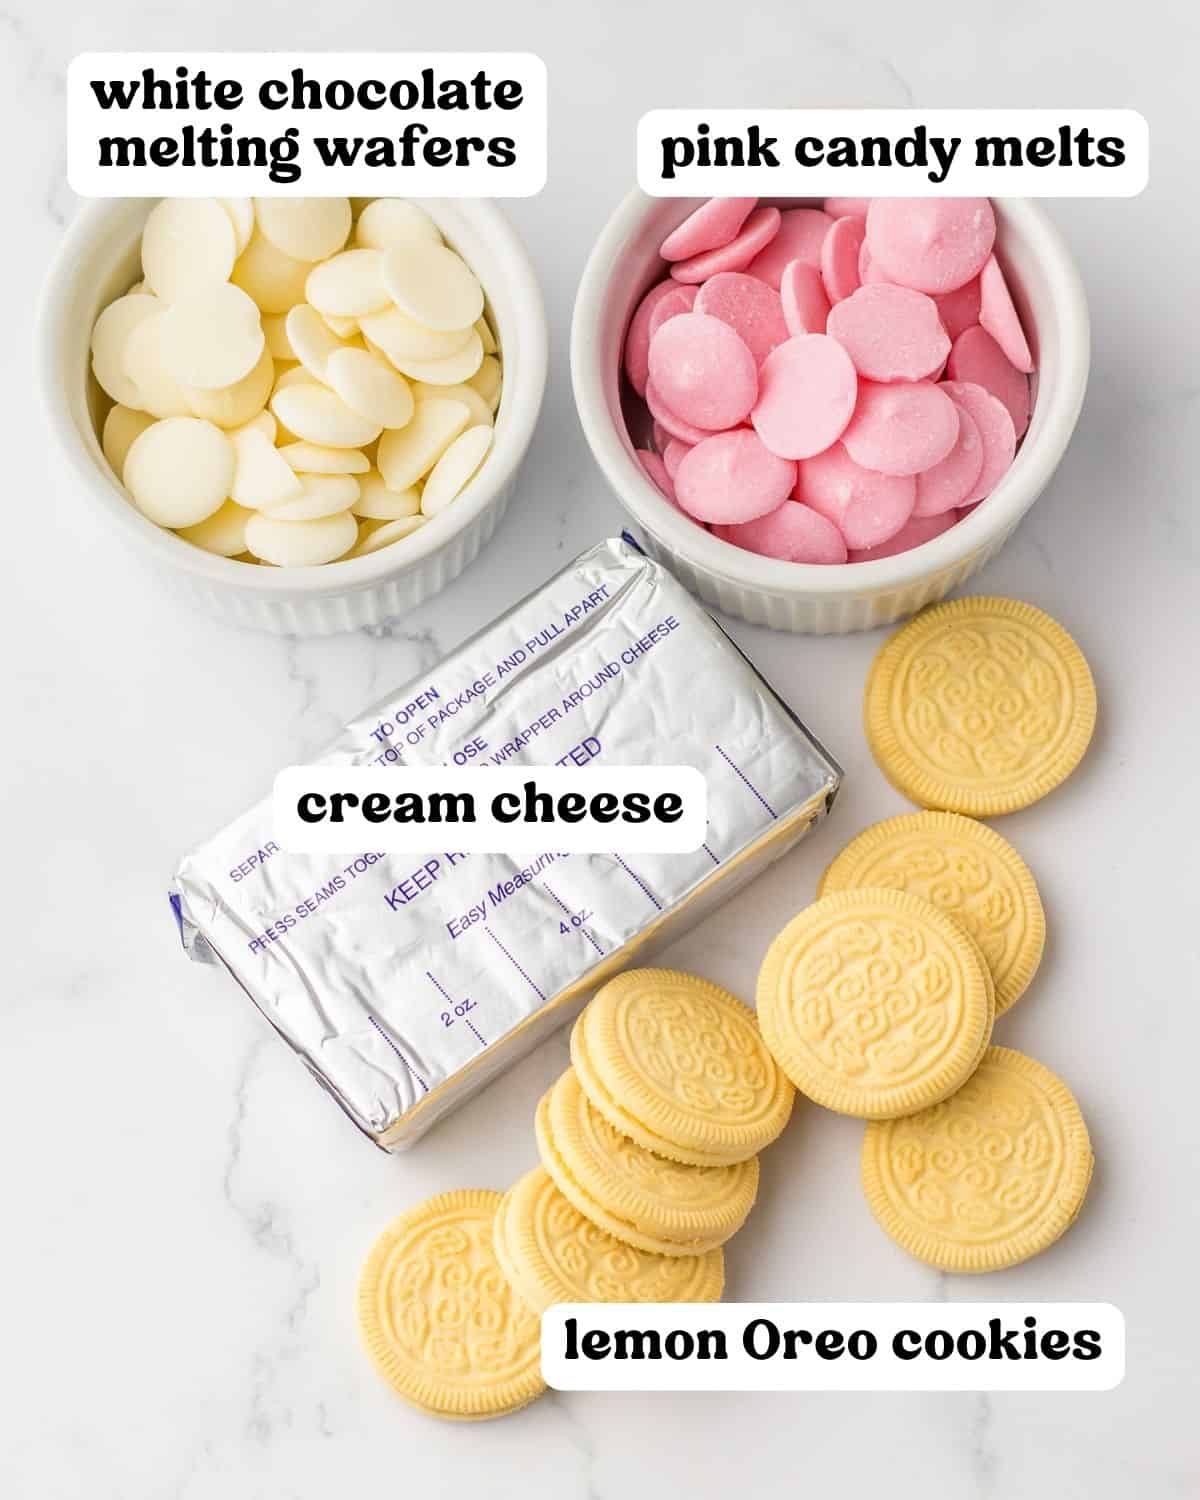 White chocolate melting wafers, cream cheese, pink candy melts, and lemon cookies.